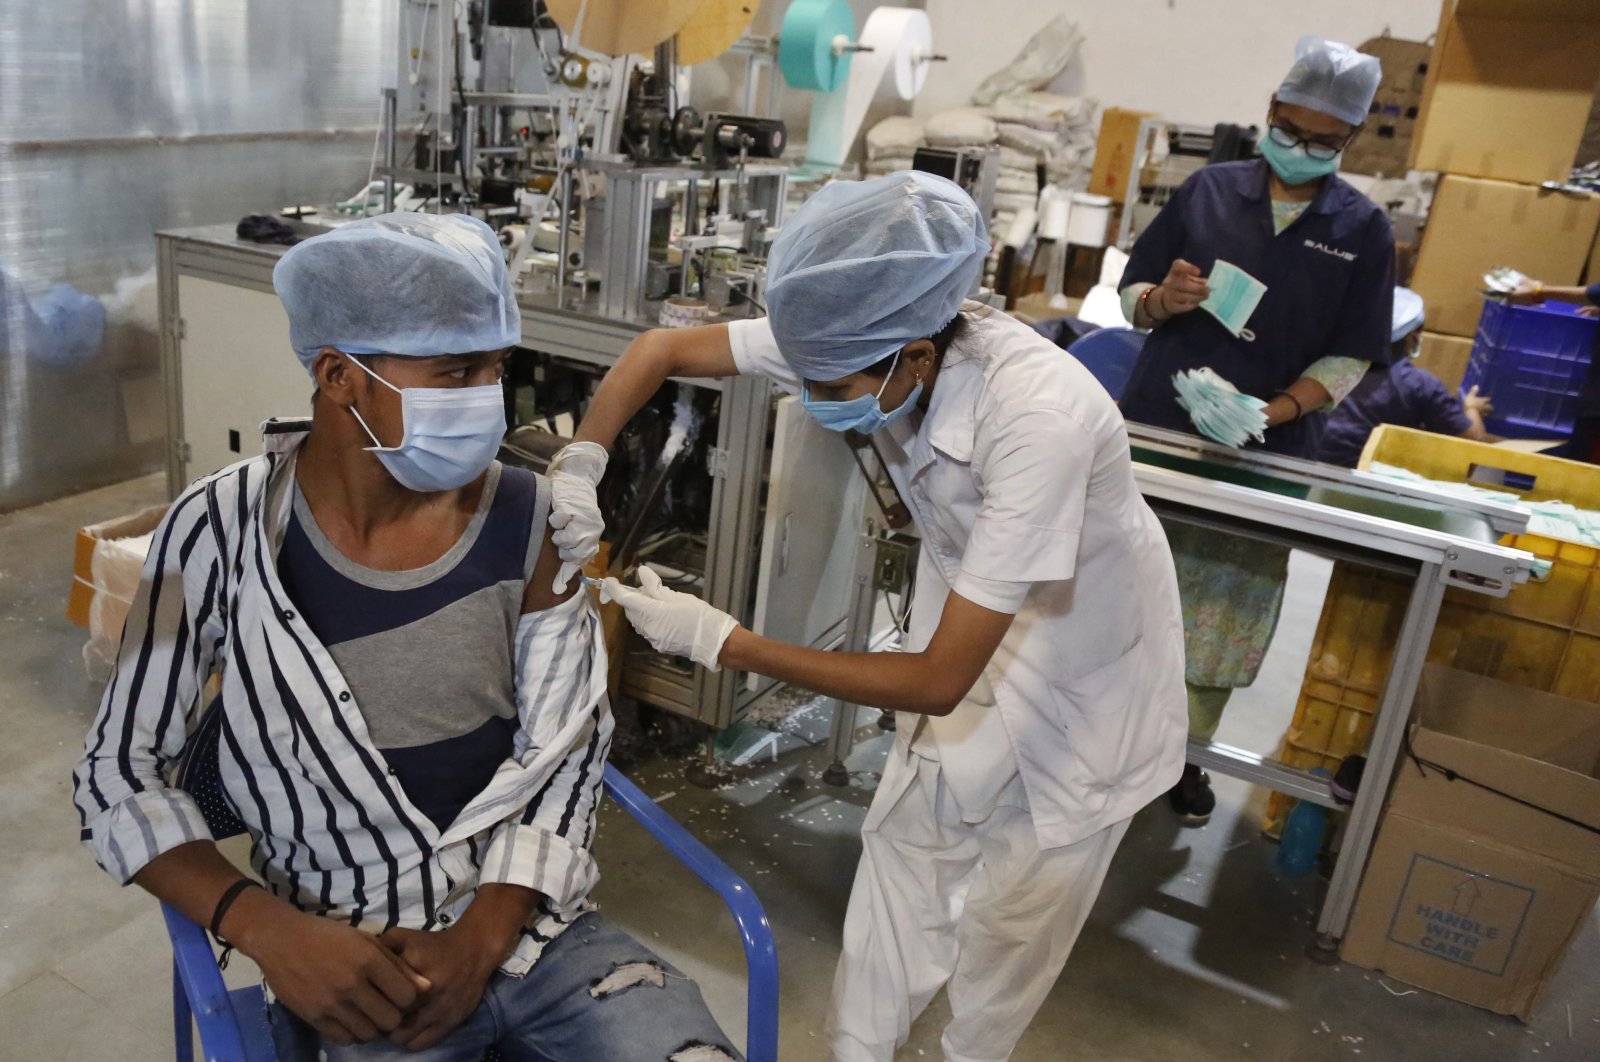 An Indian health worker administers the Covishield vaccine for COVID-19 to a worker at the factory of a face mask manufacturer on the outskirts of Ahmedabad, India, Friday, Dec. 17, 2021. (AP Photo)